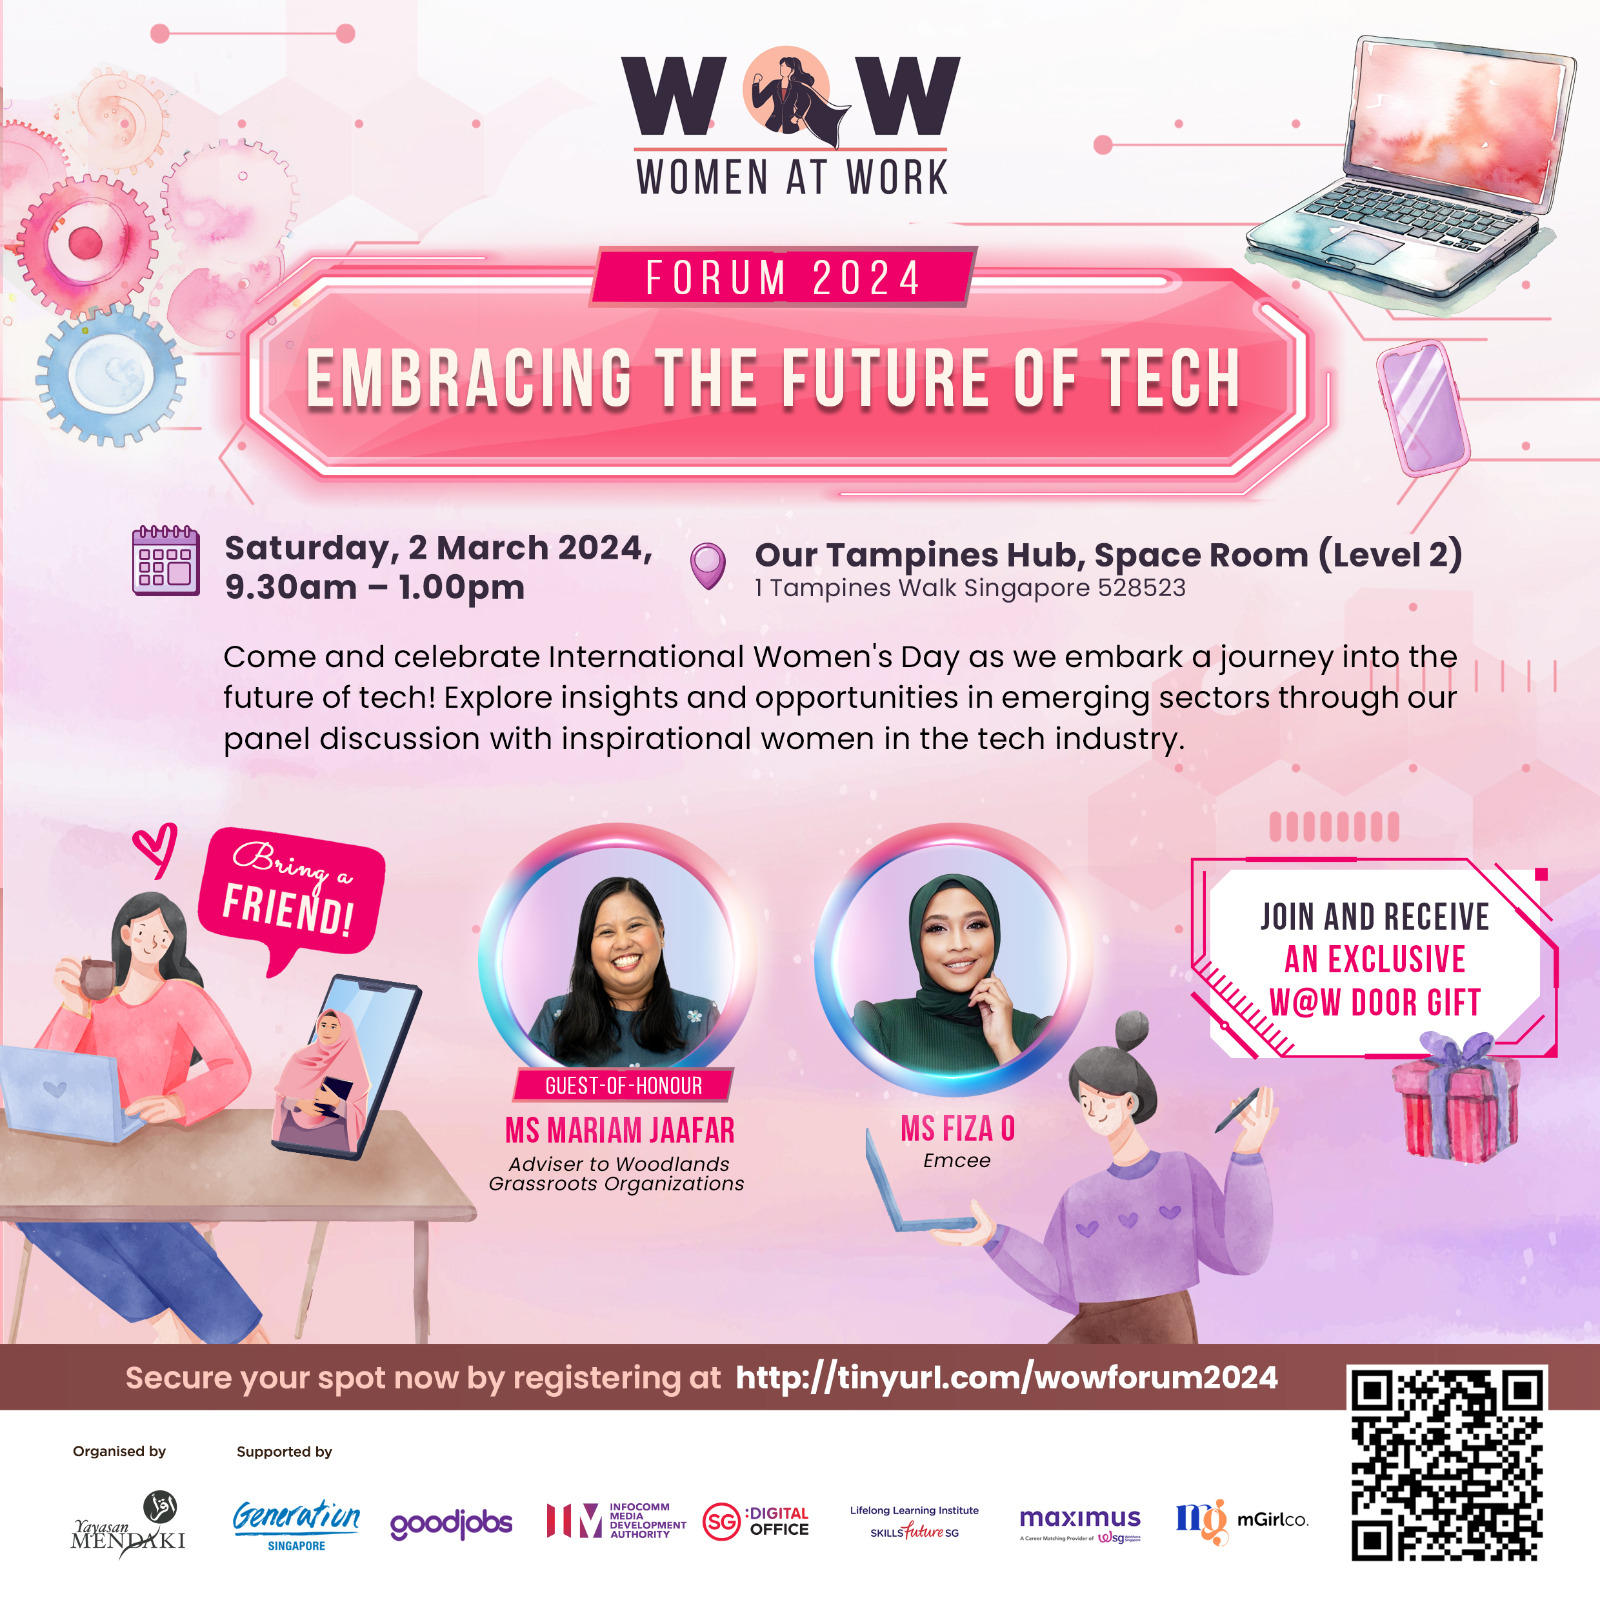 W@W FORUM 2024: Embracing the Future of Tech